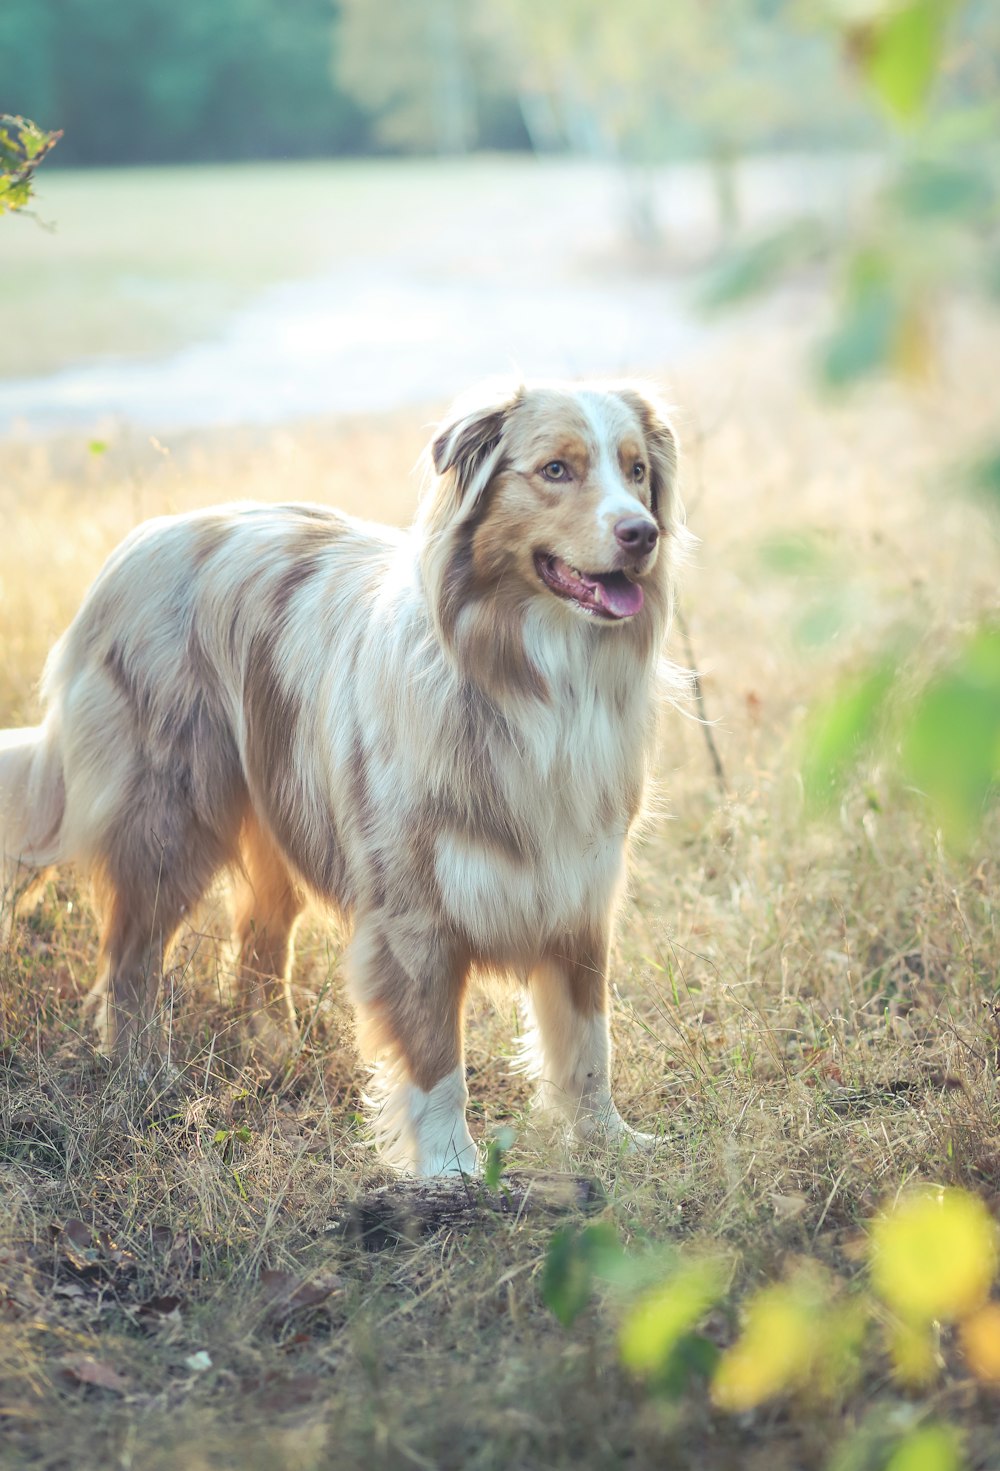 white and brown long coated dog on brown grass field during daytime